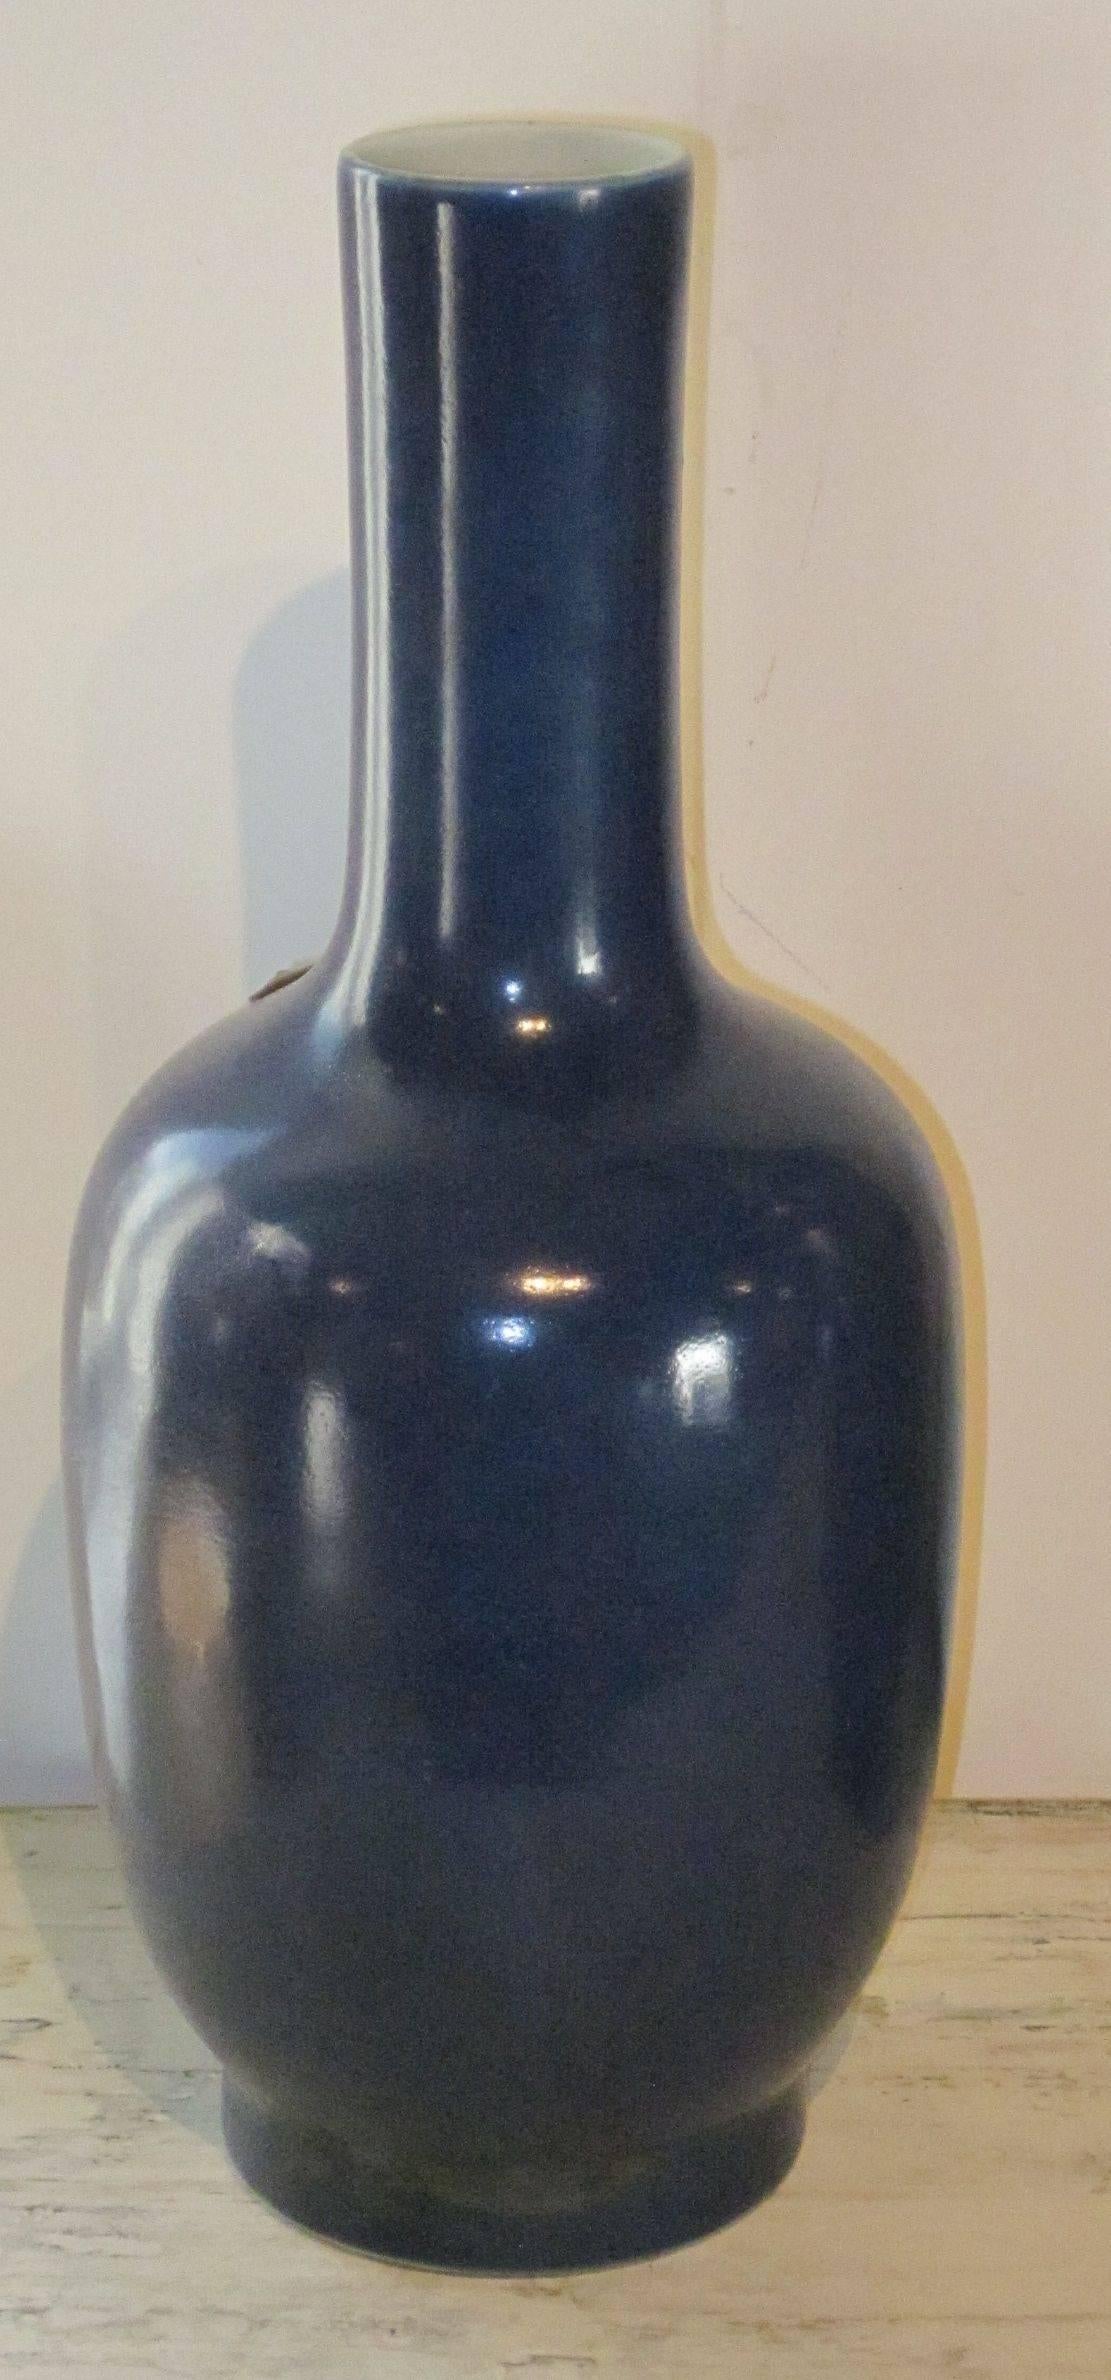 Contemporary Chinese sapphire blue ceramic vase.
Tall tube neck.
Beautiful shade of sapphire with white interior.
